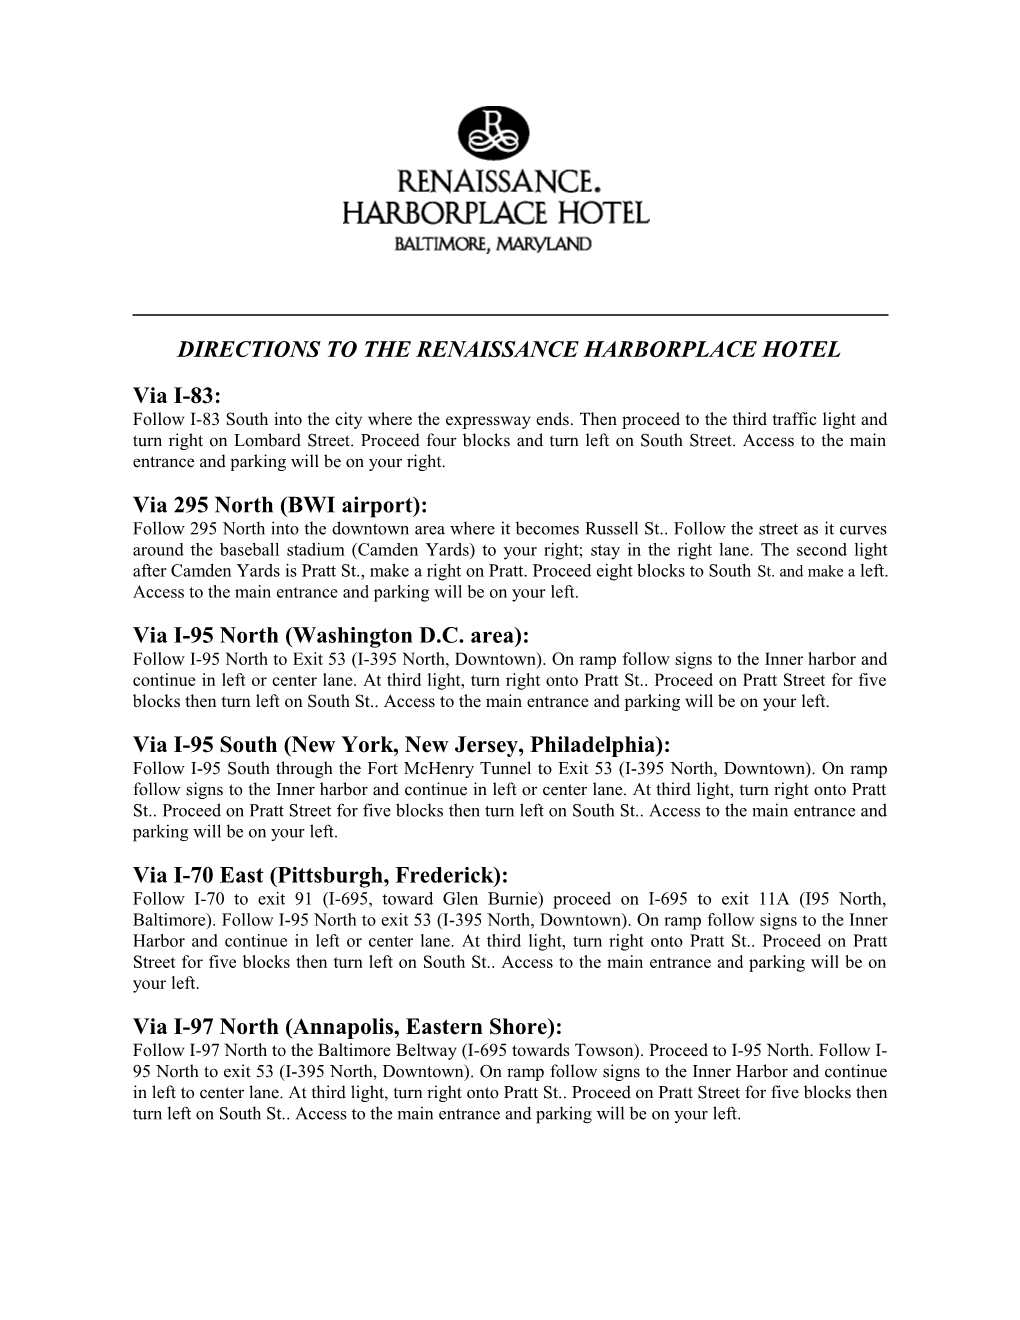 Directions to the Renaissance Harborplace Hotel